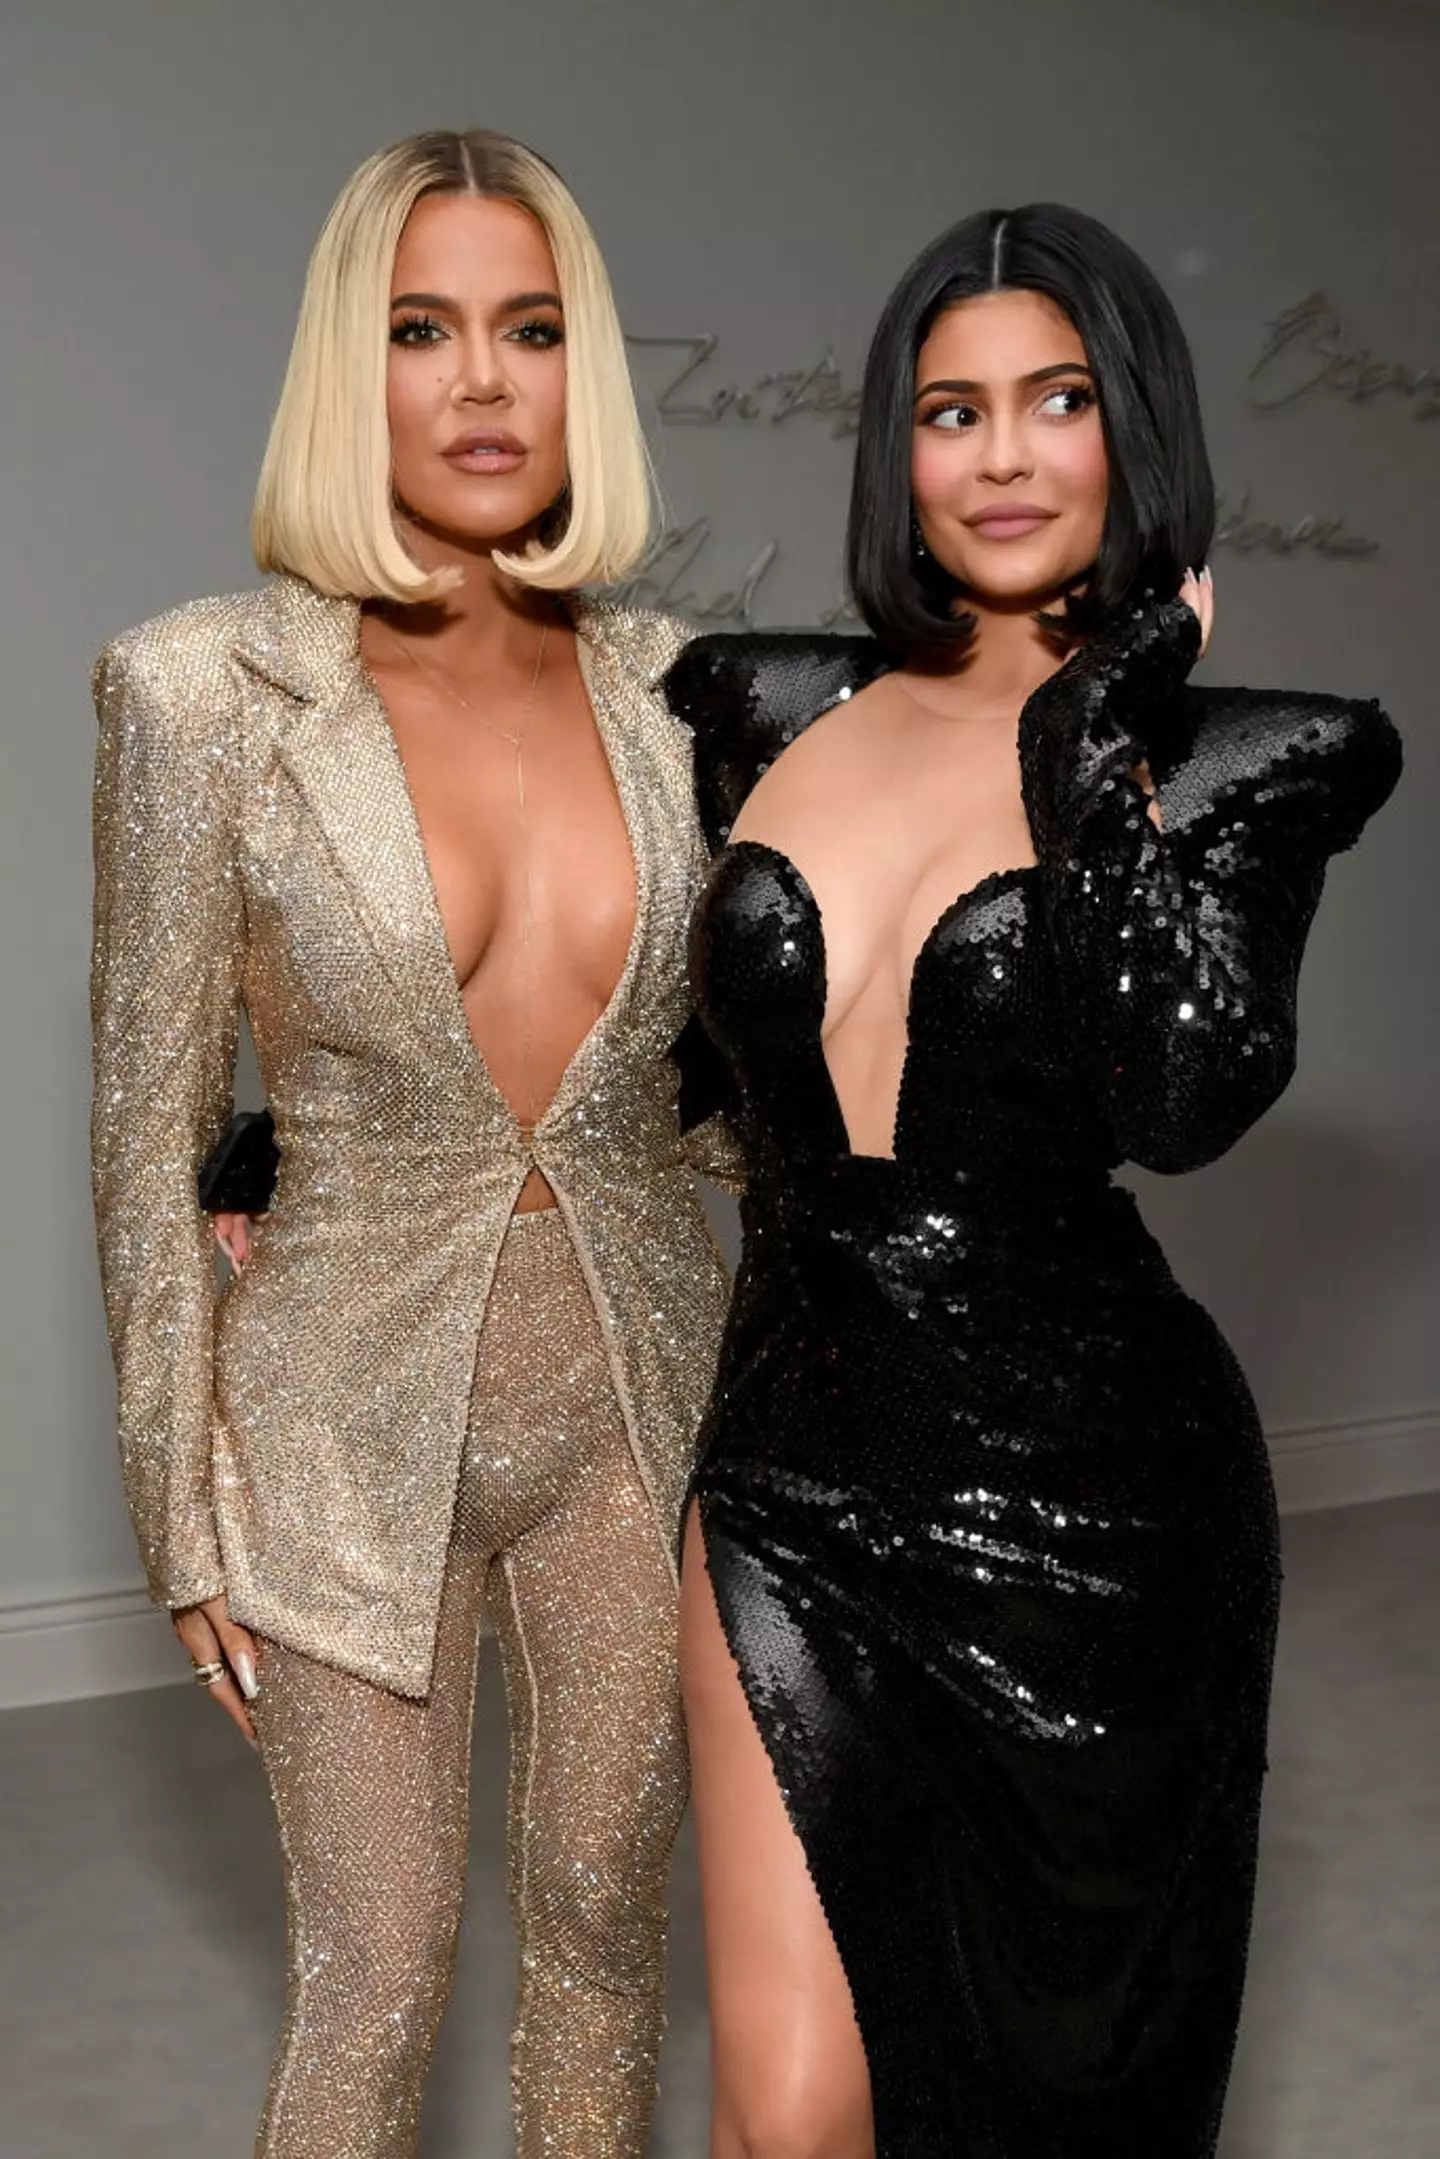 Kourtney Kardashian and Kylie Jenner. (Kevin Mazur/Getty Images for Sean Combs)